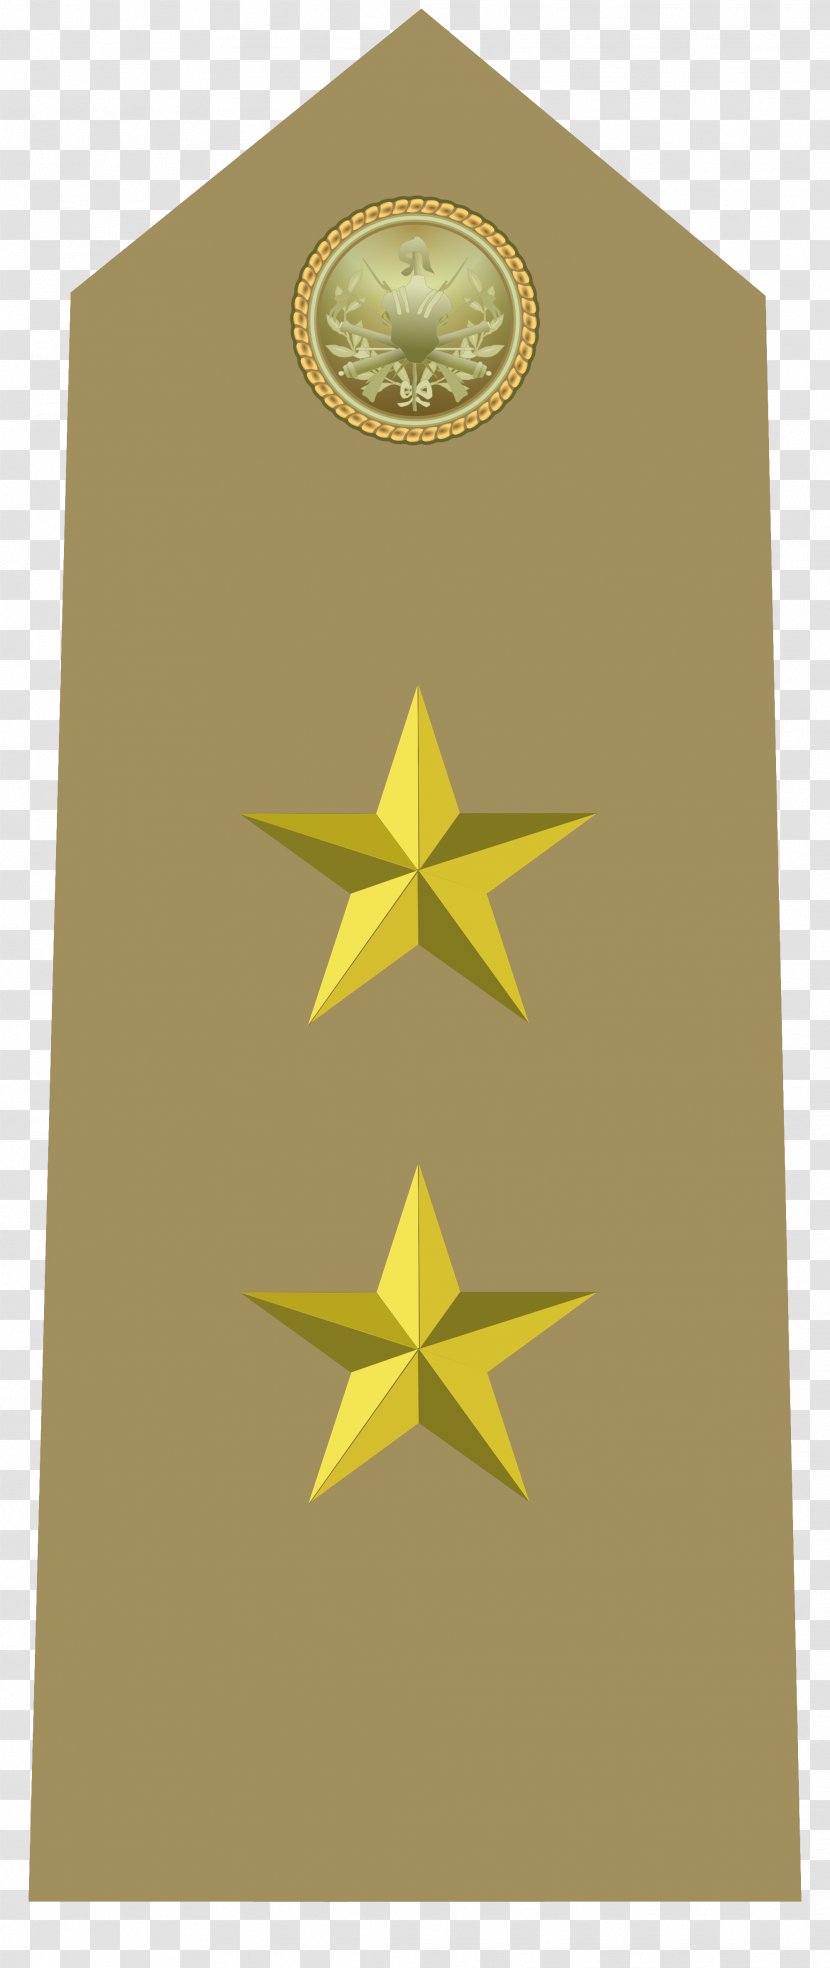 Staff Captain Colonel Military Rank Italian Army - Royal Transparent PNG